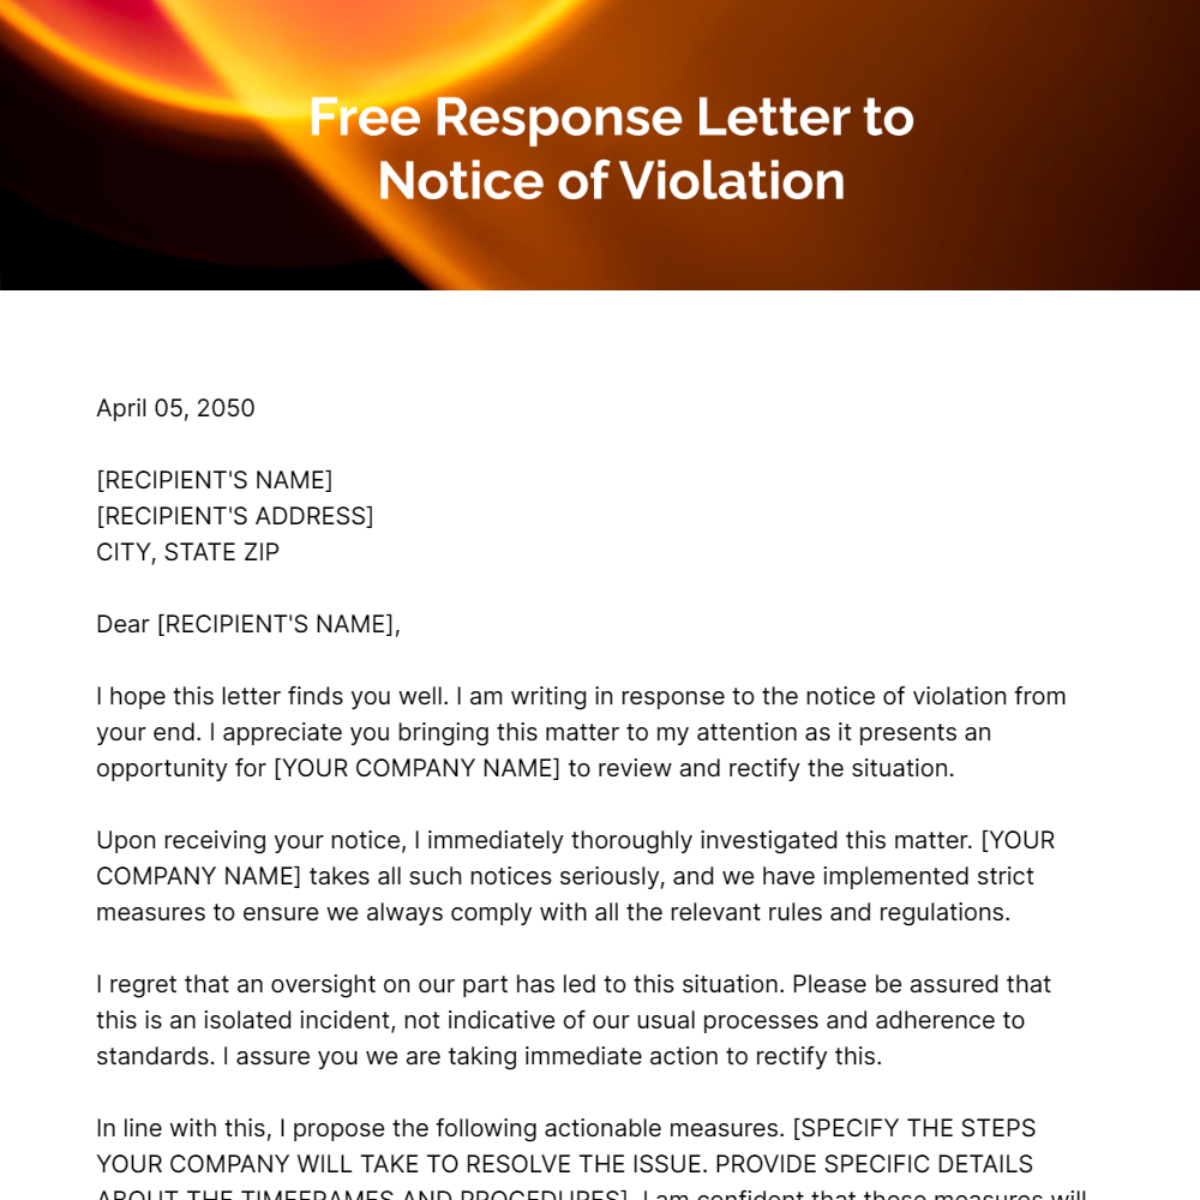 Free Response Letter to Notice of Violation